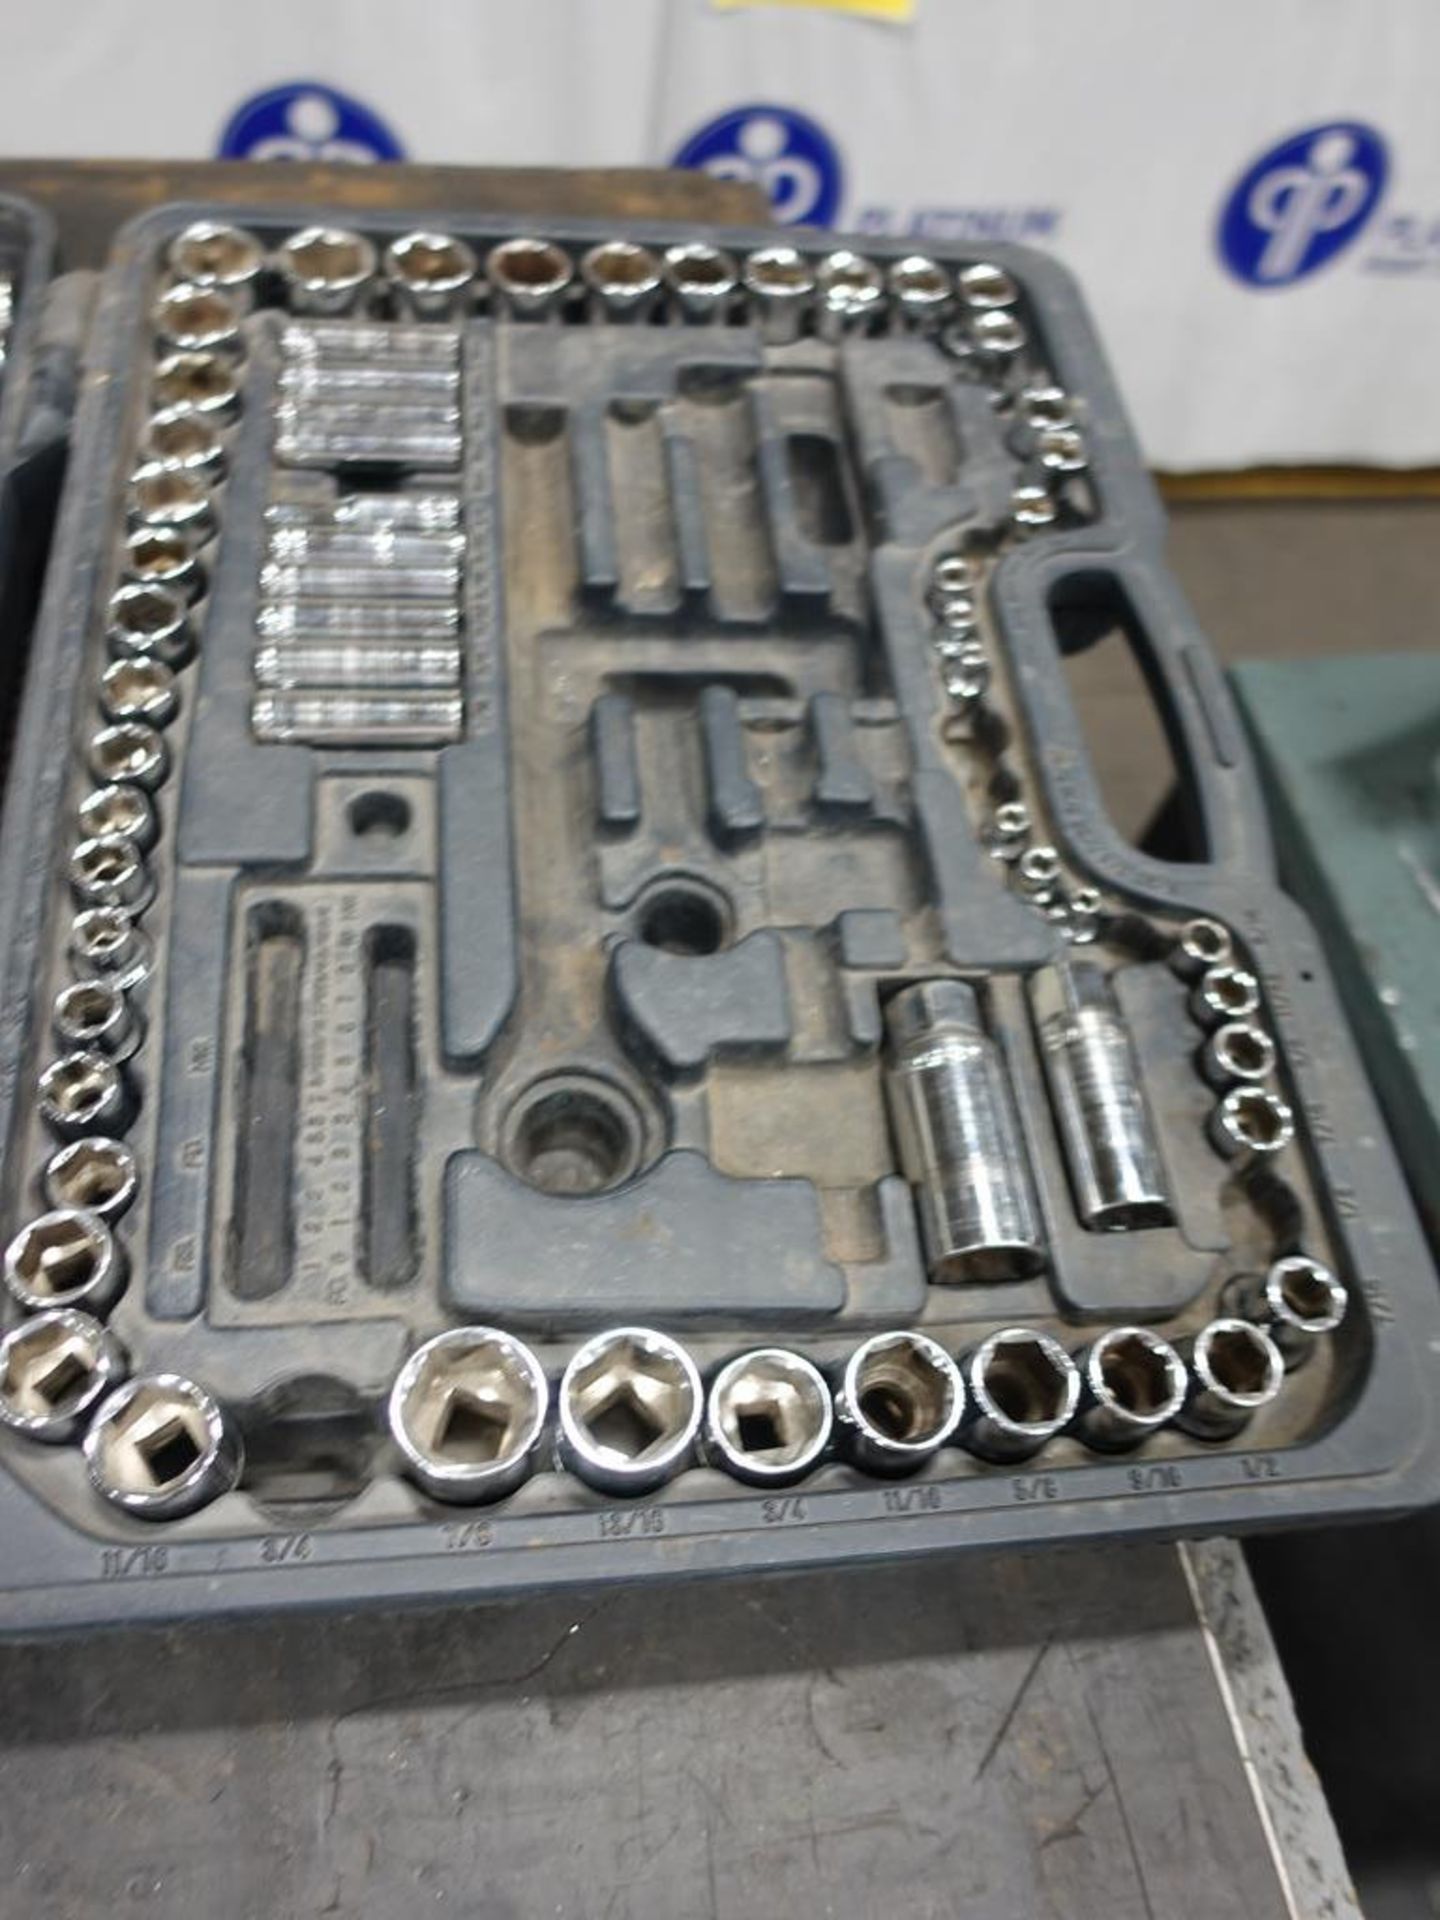 LOT OF RATCHET AND WRENCH SETS - Image 4 of 4